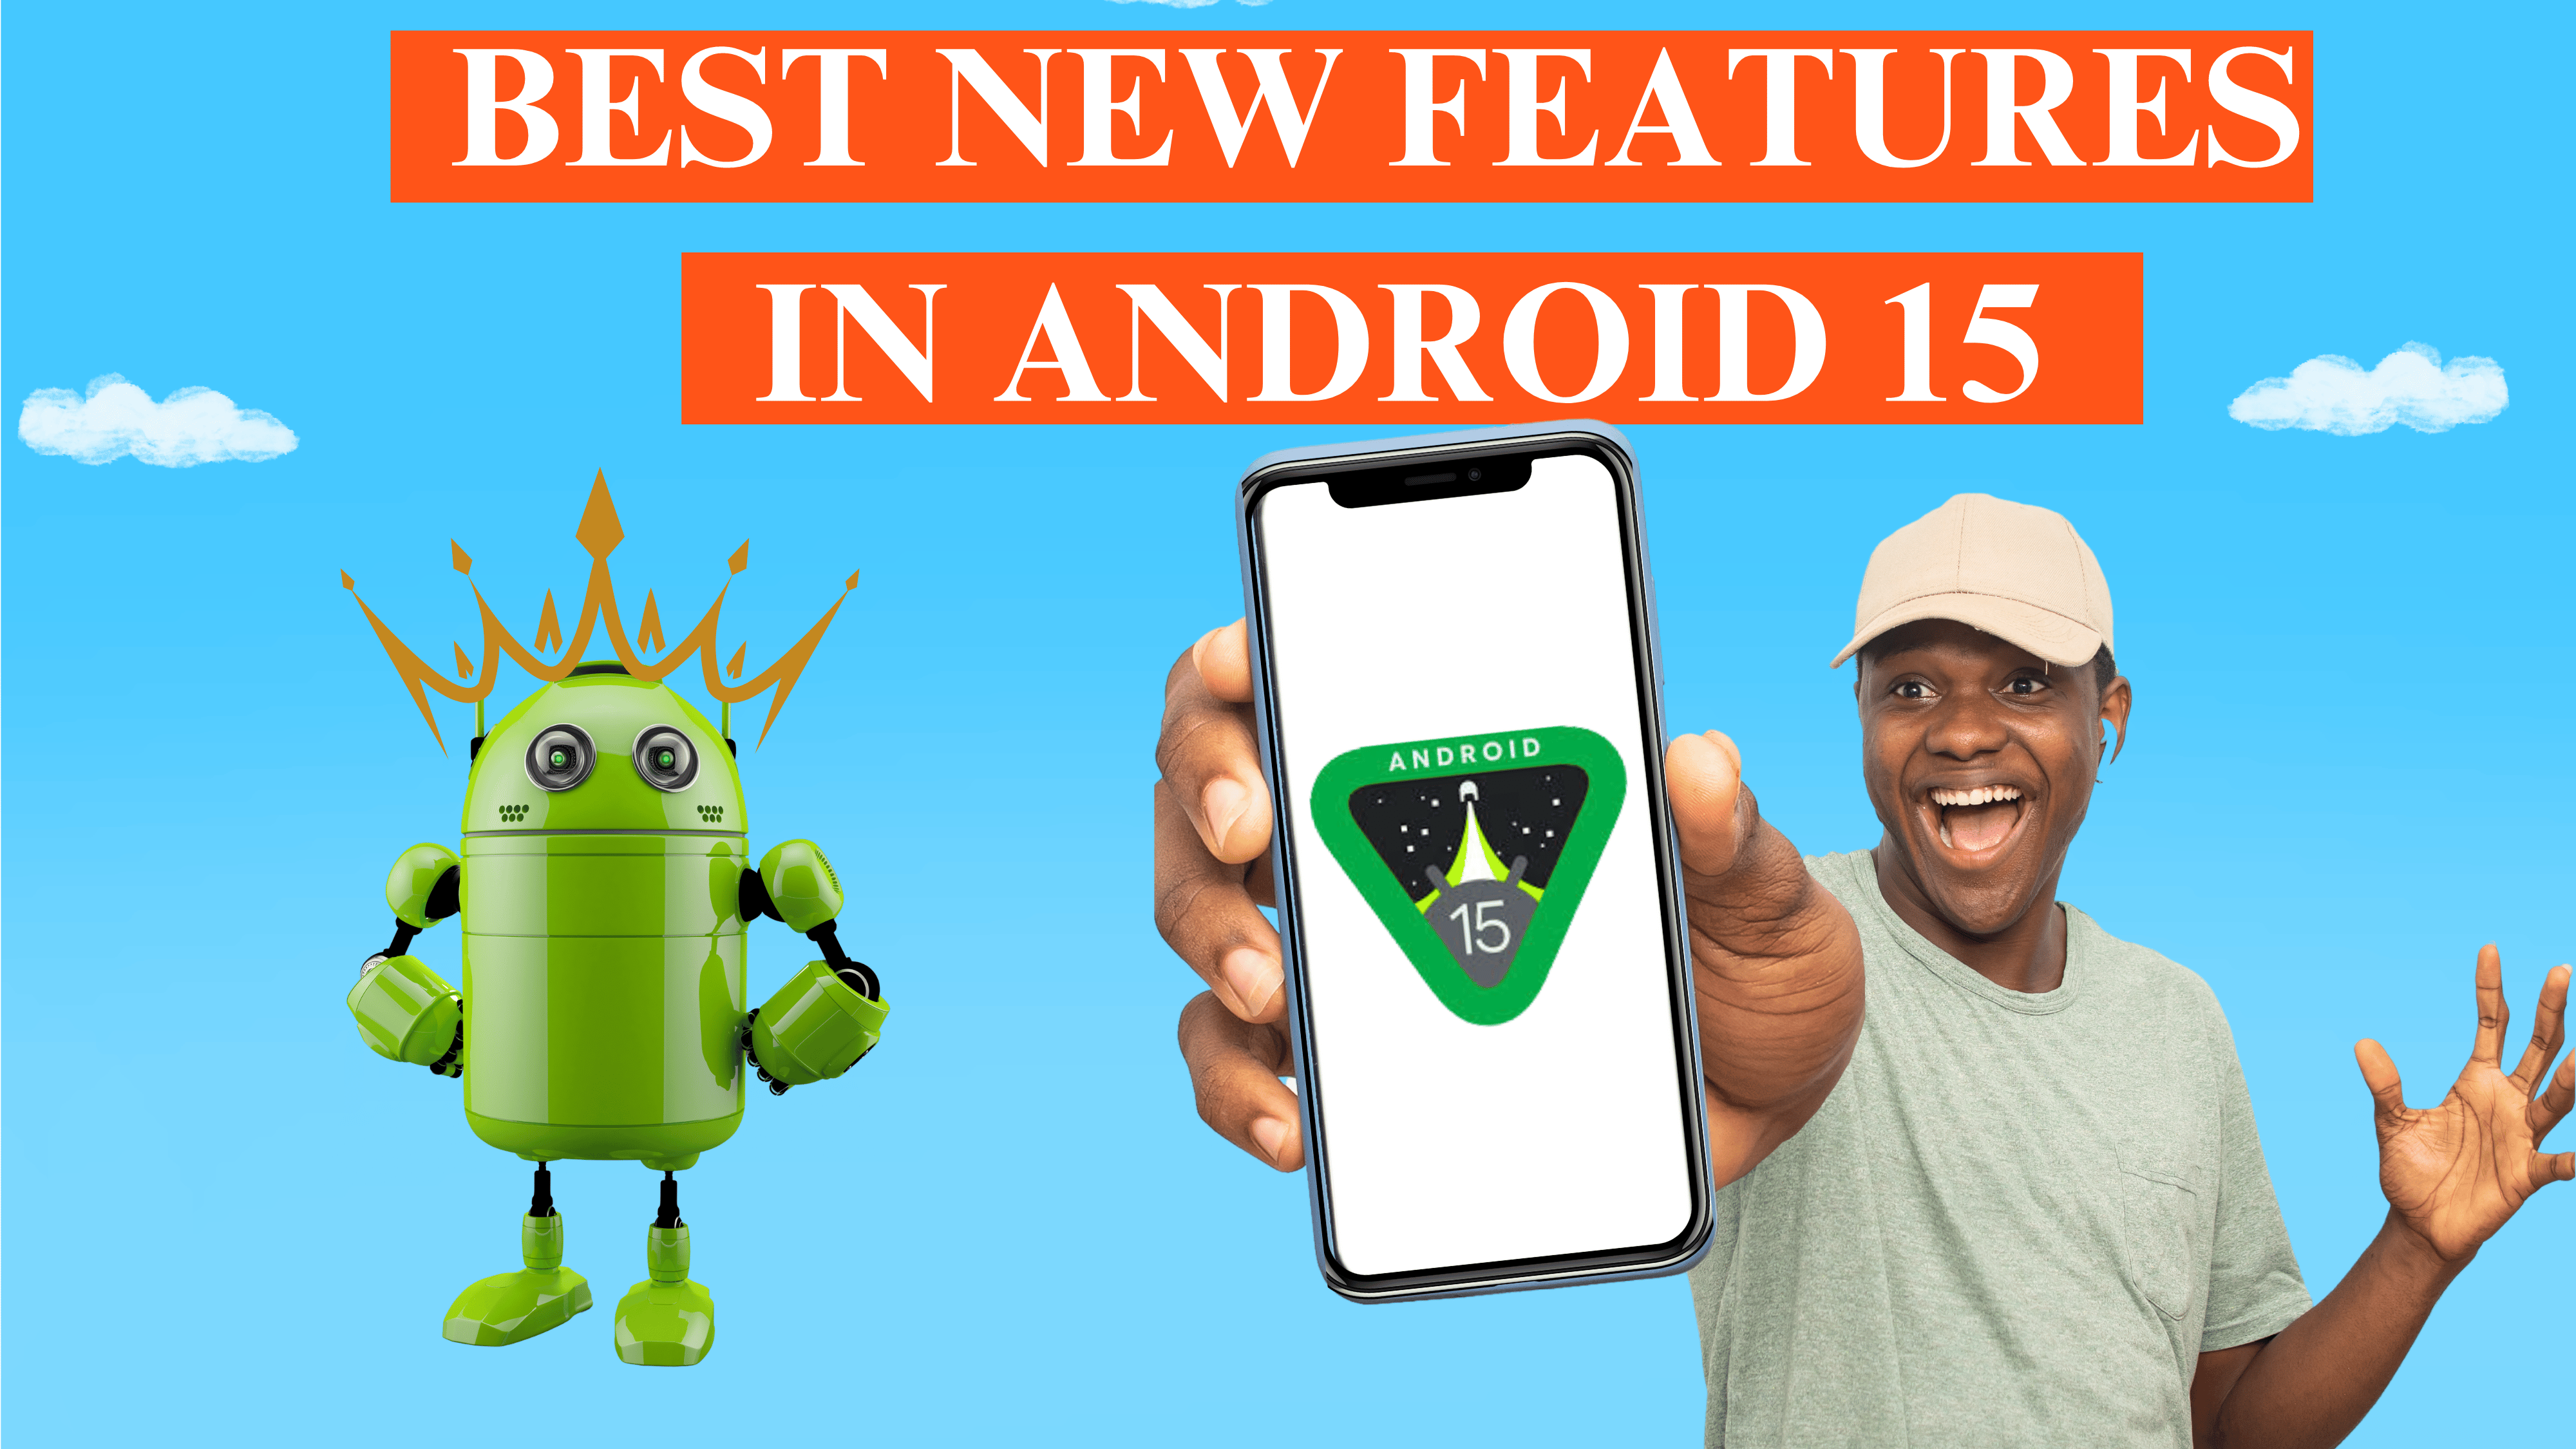 Android 15 feature in android 15 new phone with android 15 best new phone